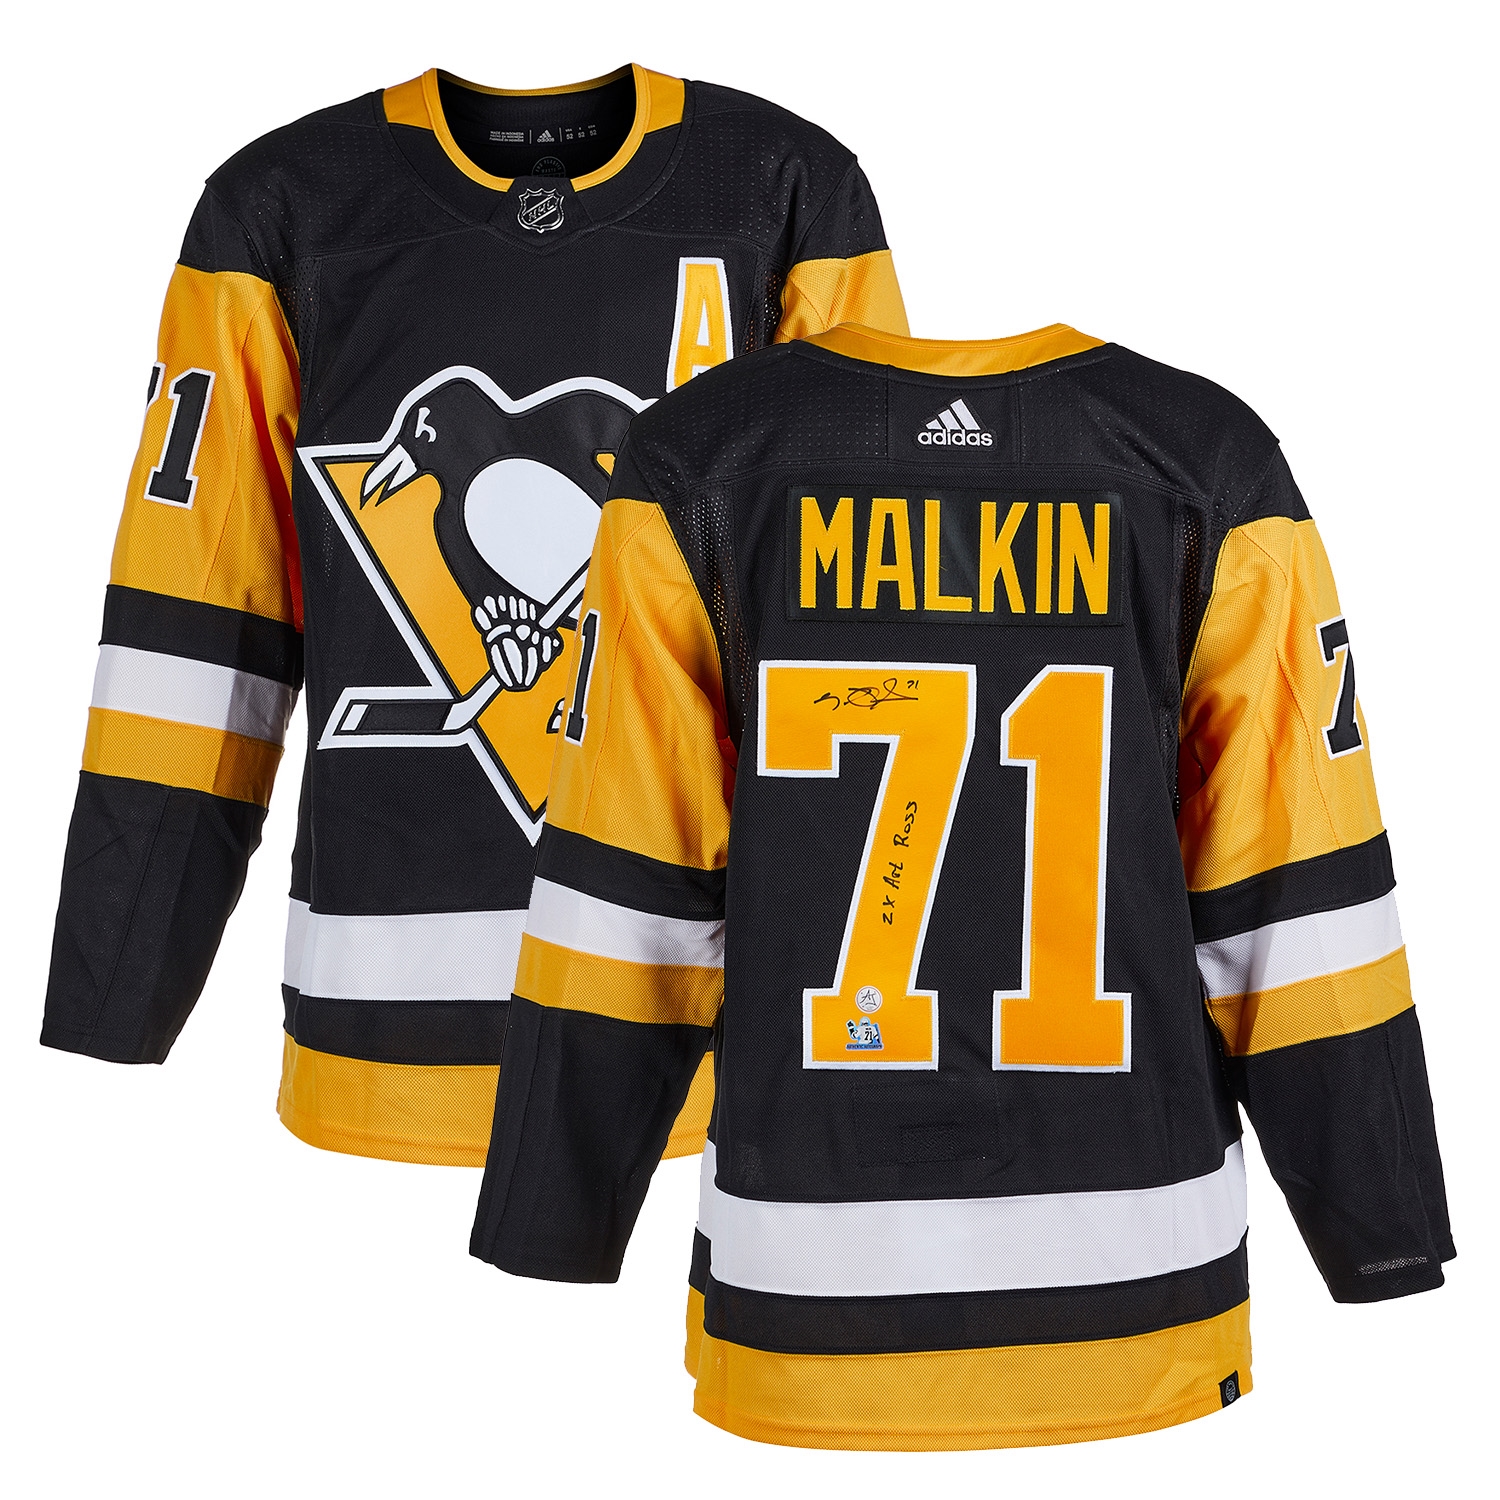 Evgeni Malkin Signed Pittsburgh Penguins adidas Jersey with Art Ross Note